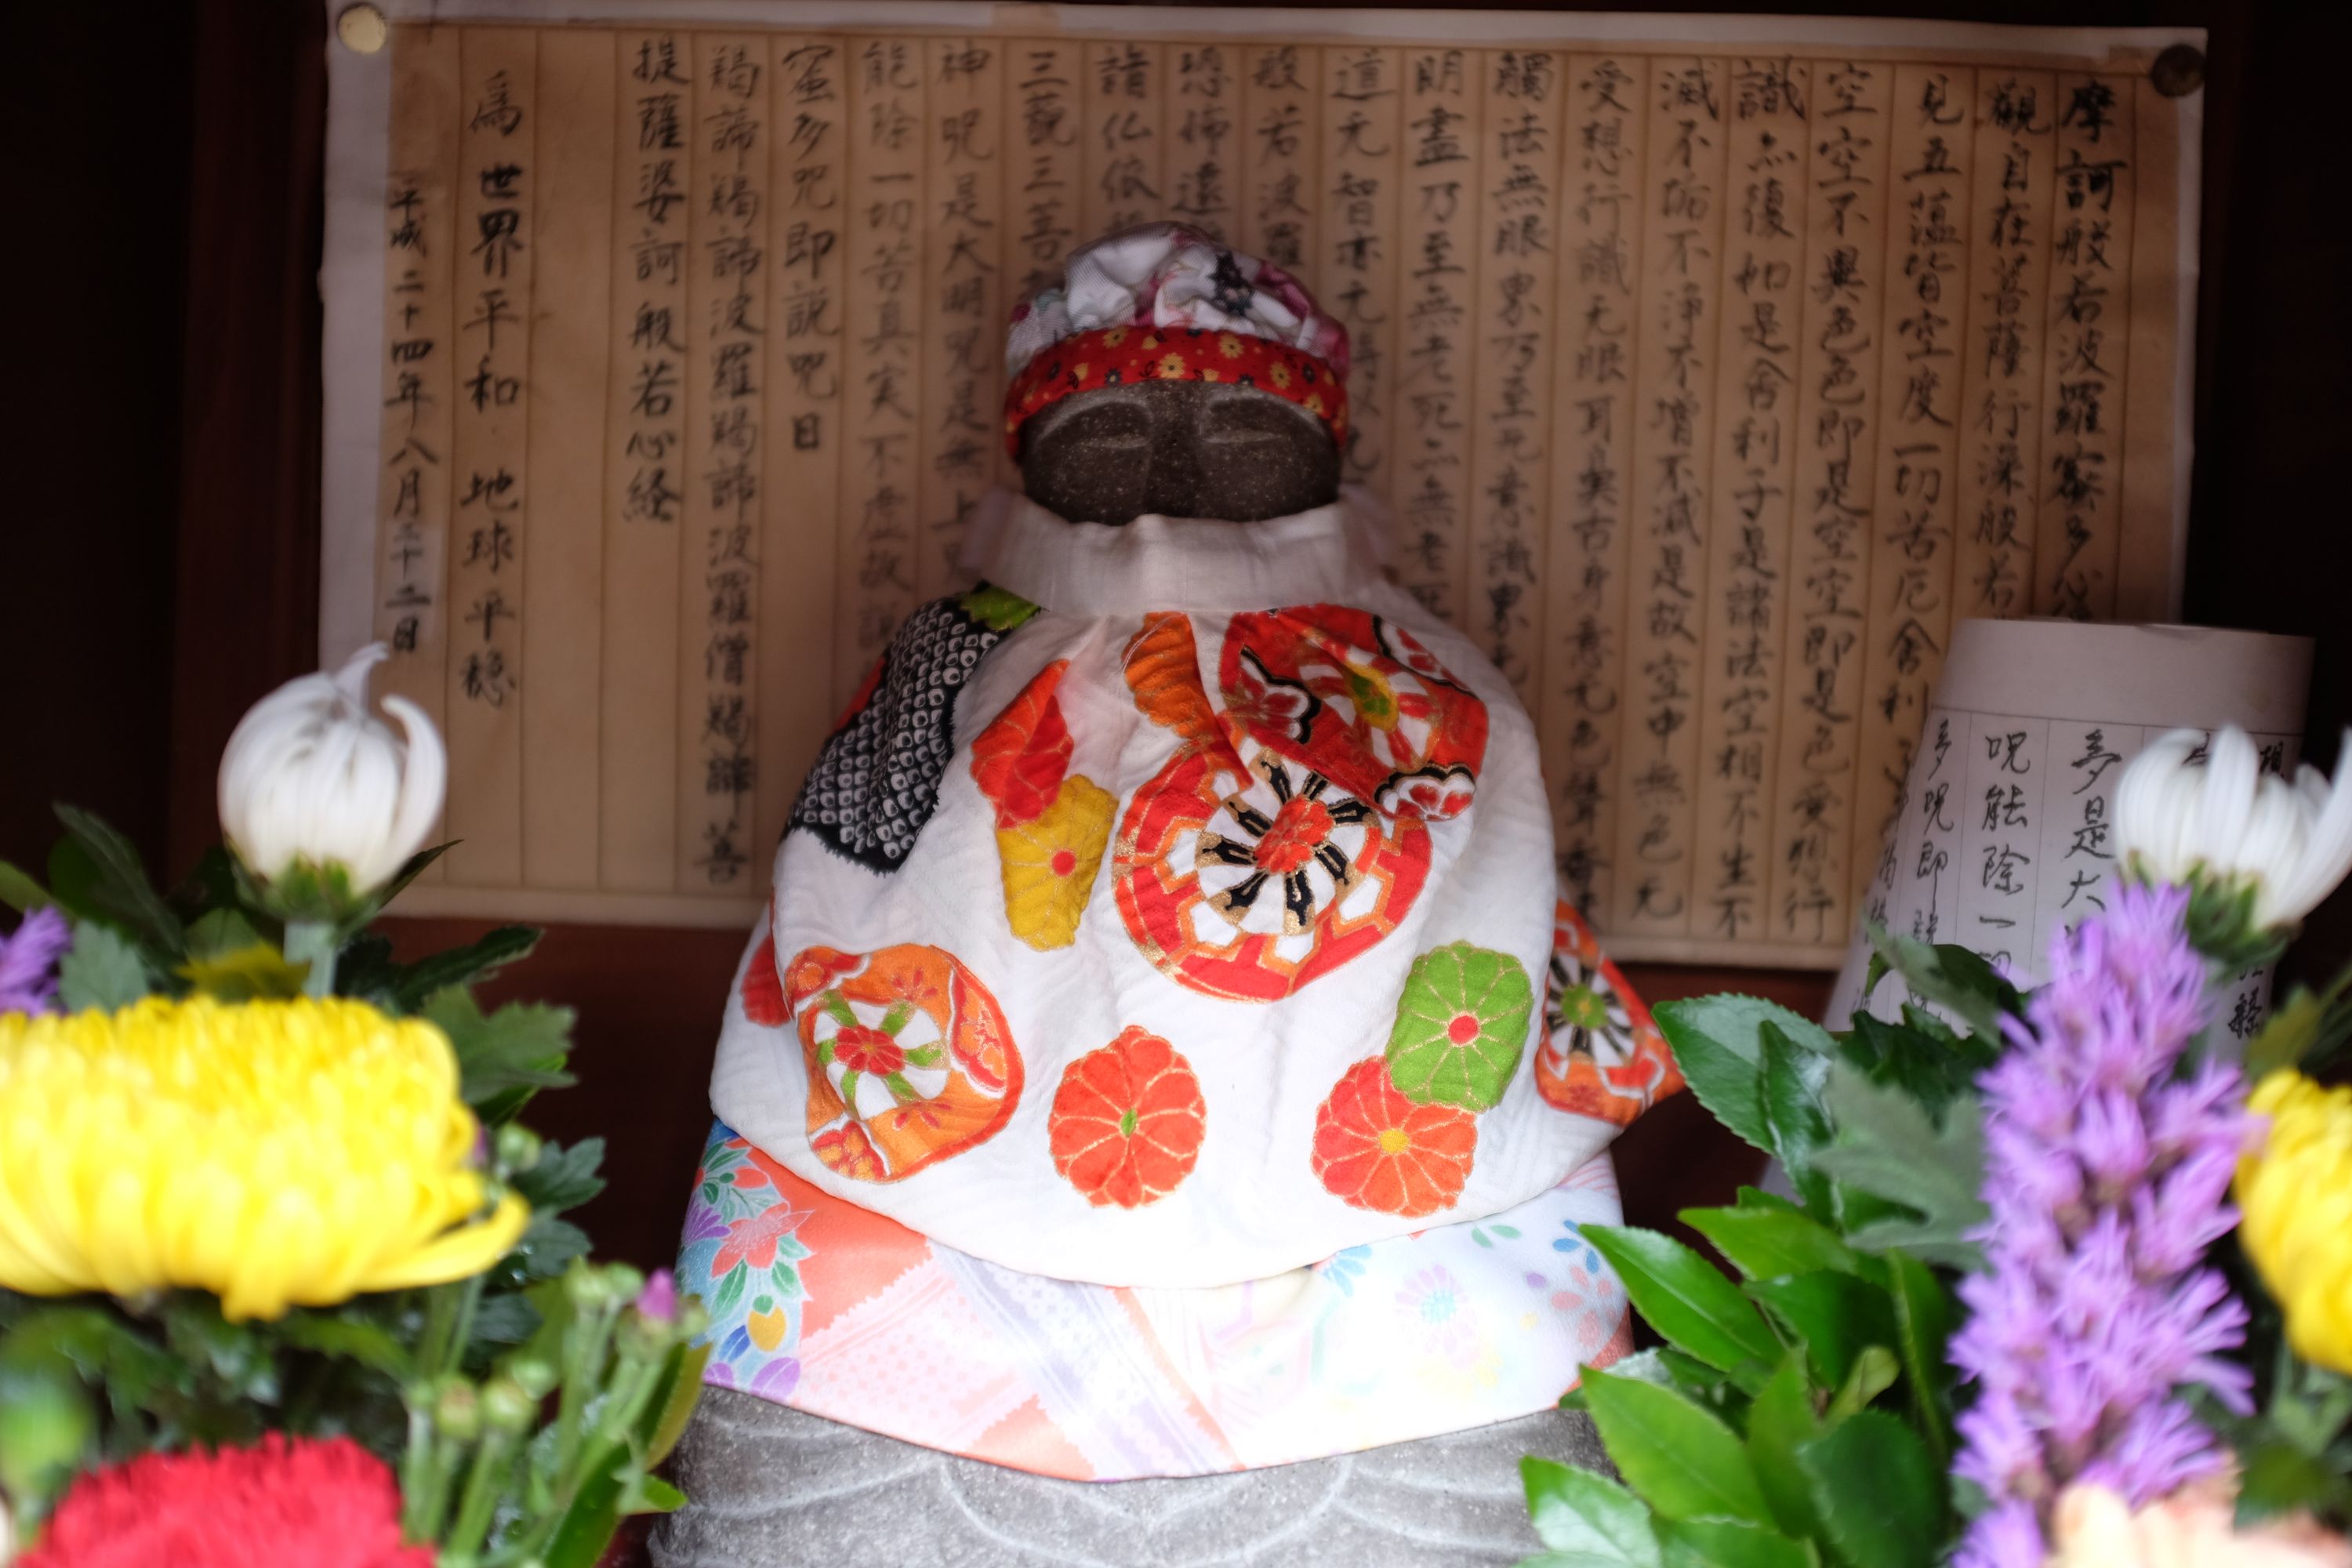 A Buddha statue on an altar decorated with flowers.